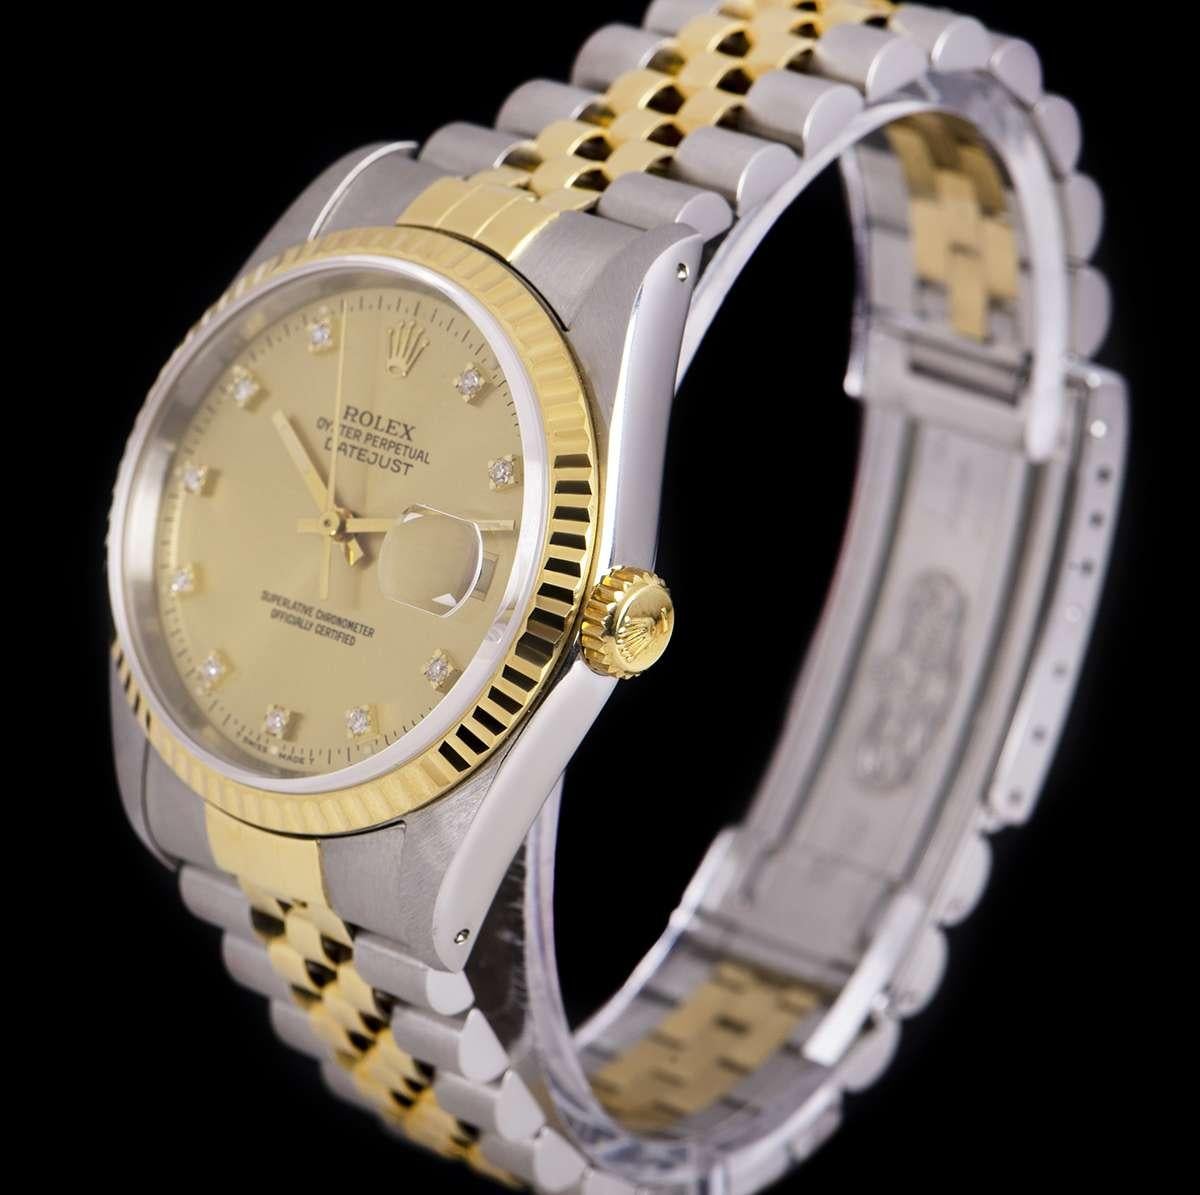 An Unworn Stainless Steel and 18k Yellow Gold Oyster Perpetual Datejust NOS Gents Wristwatch, champagne dial with 10 applied round brilliant cut diamond hour markers, date at 3 0'clock, a fixed 18k yellow gold fluted bezel, a stainless steel and 18k